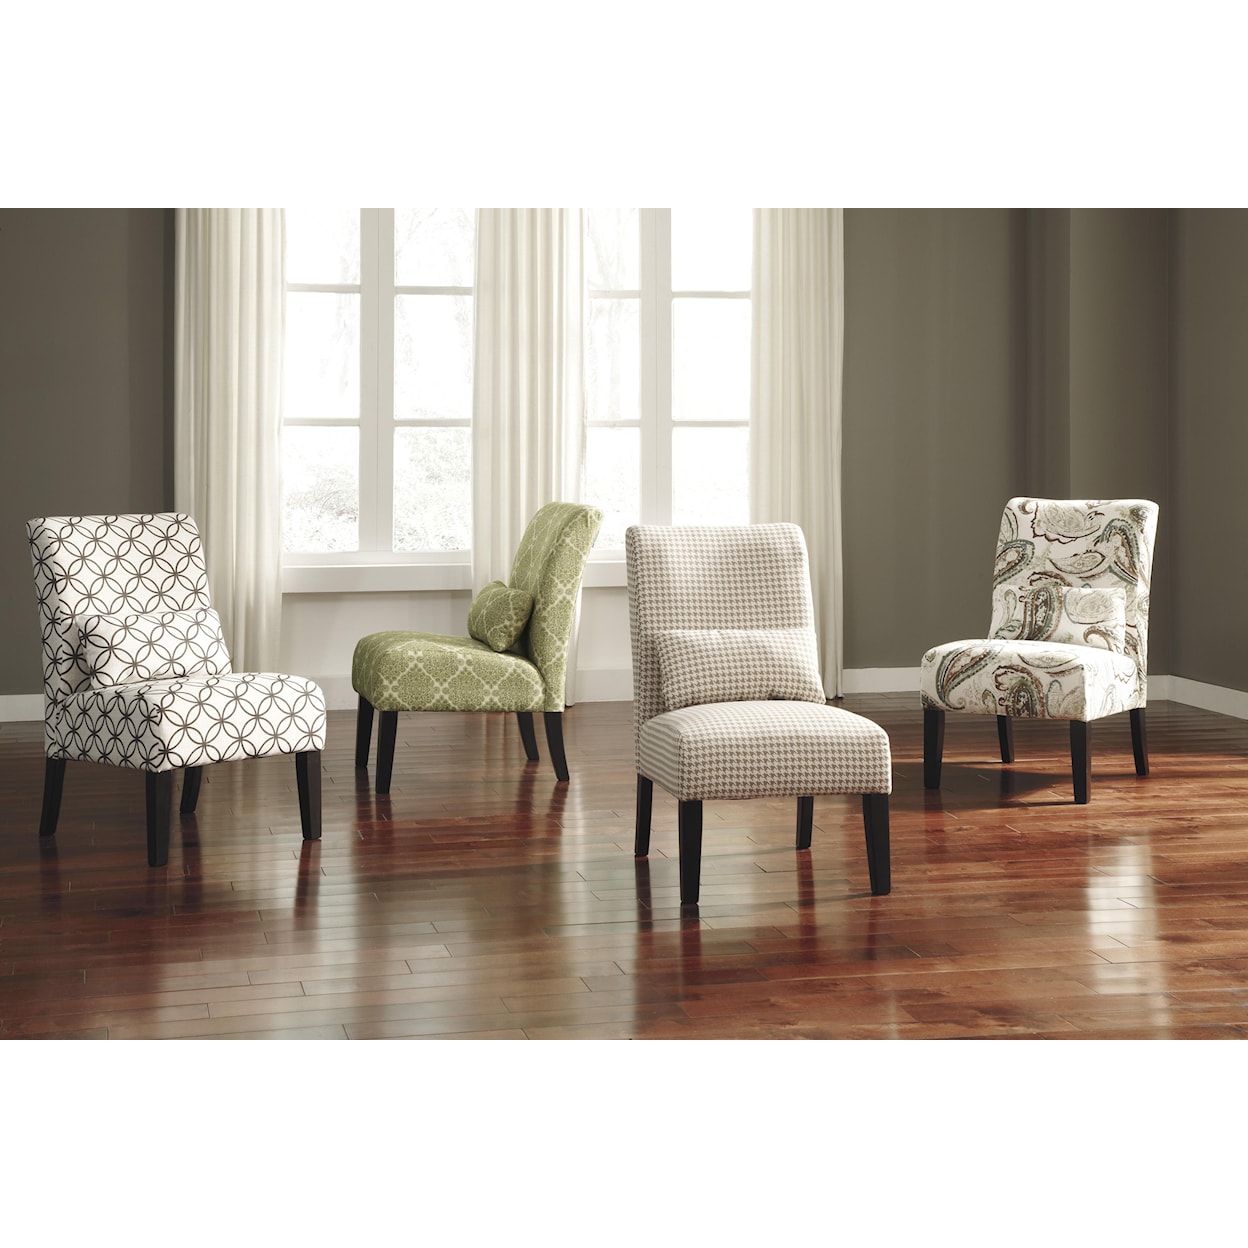 Signature Design by Ashley Annora - Kelly Accent Chair